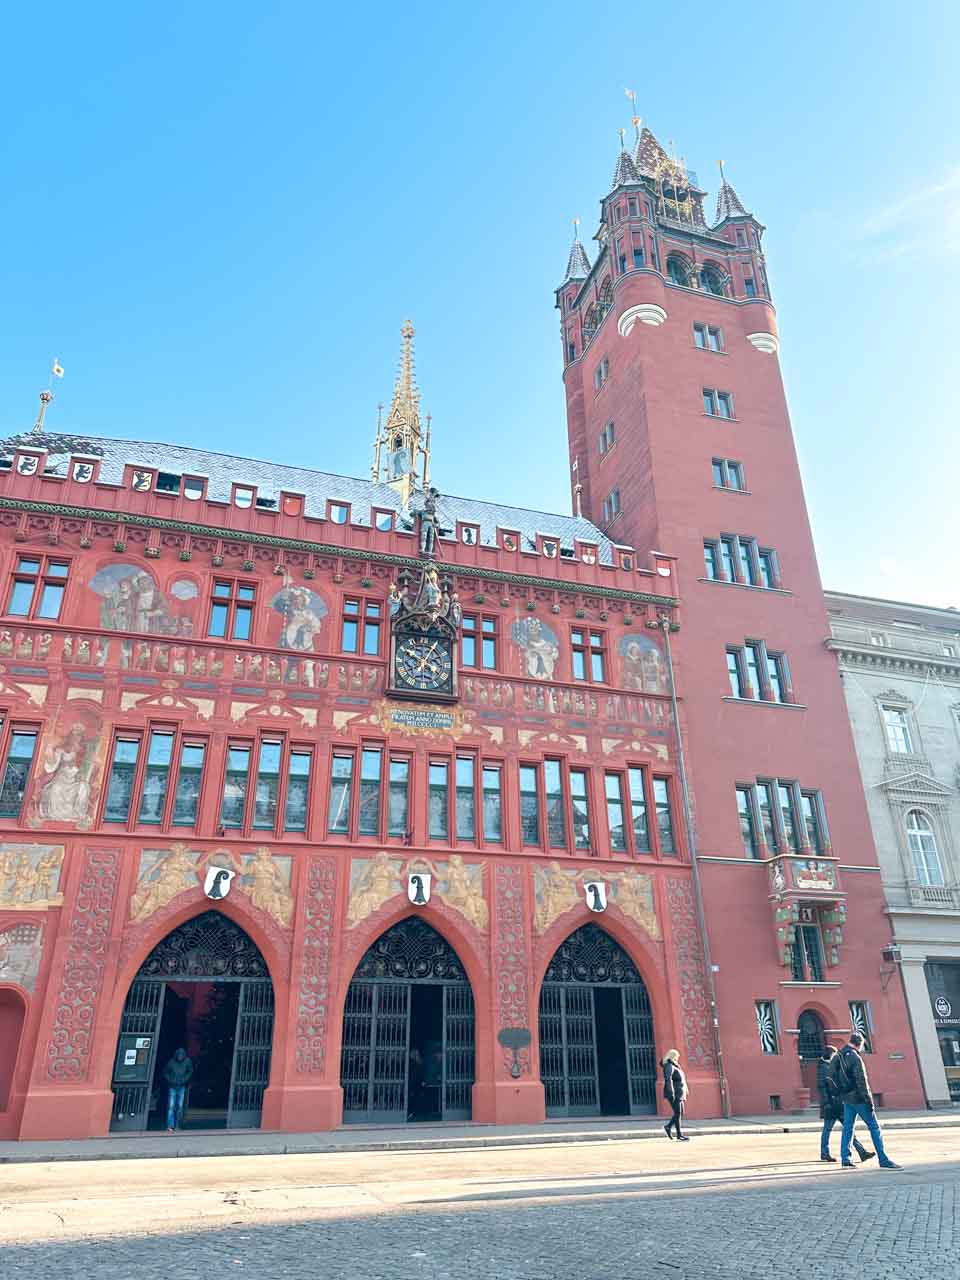 The ornate red facade of the Basel Town Hall with a tower against a clear blue sky